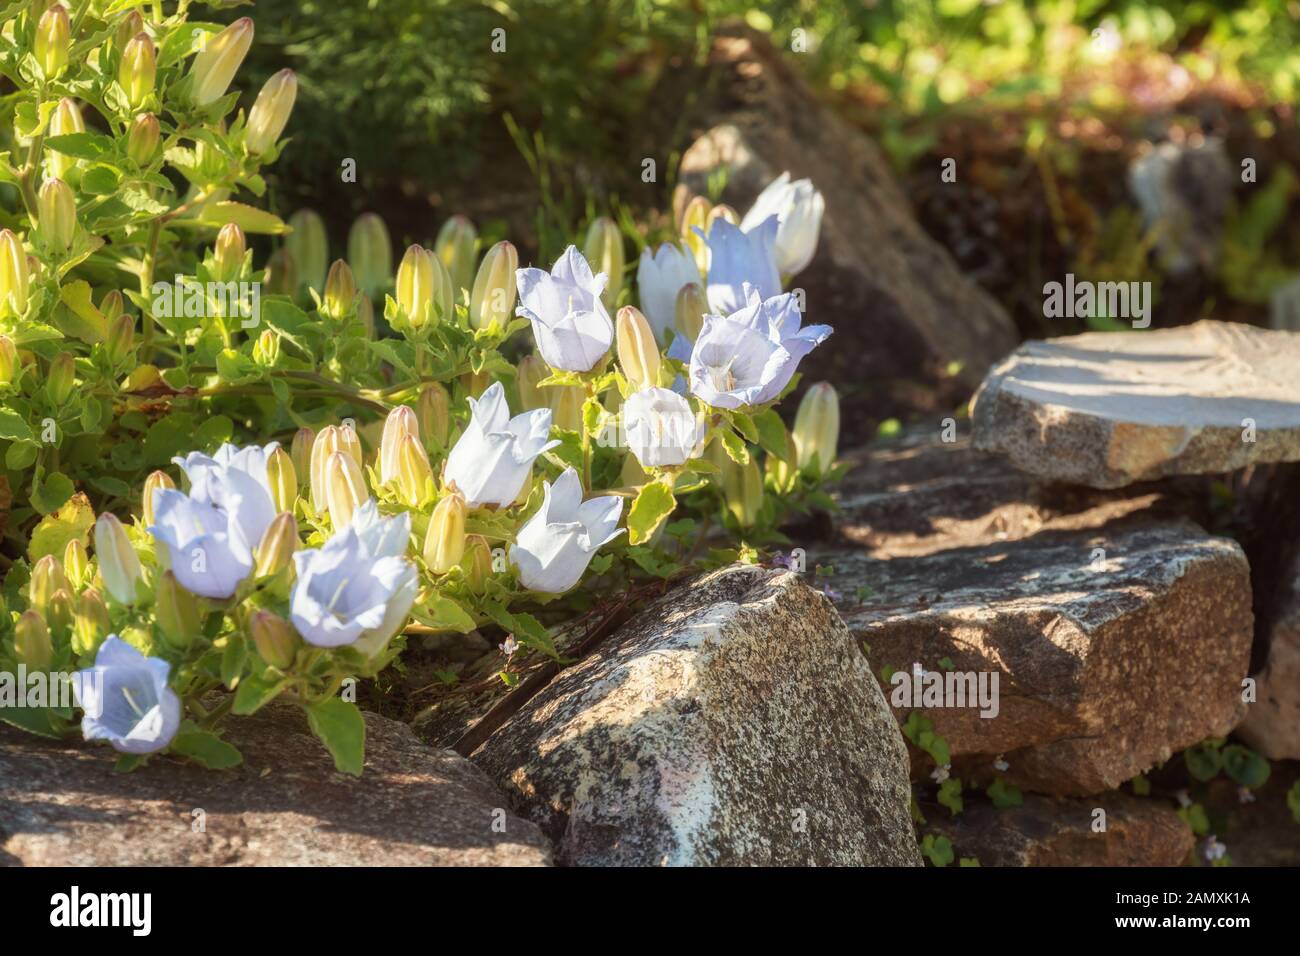 Campanula flowers. Fragment of the garden, white bellflower spreads over stones along path Stock Photo